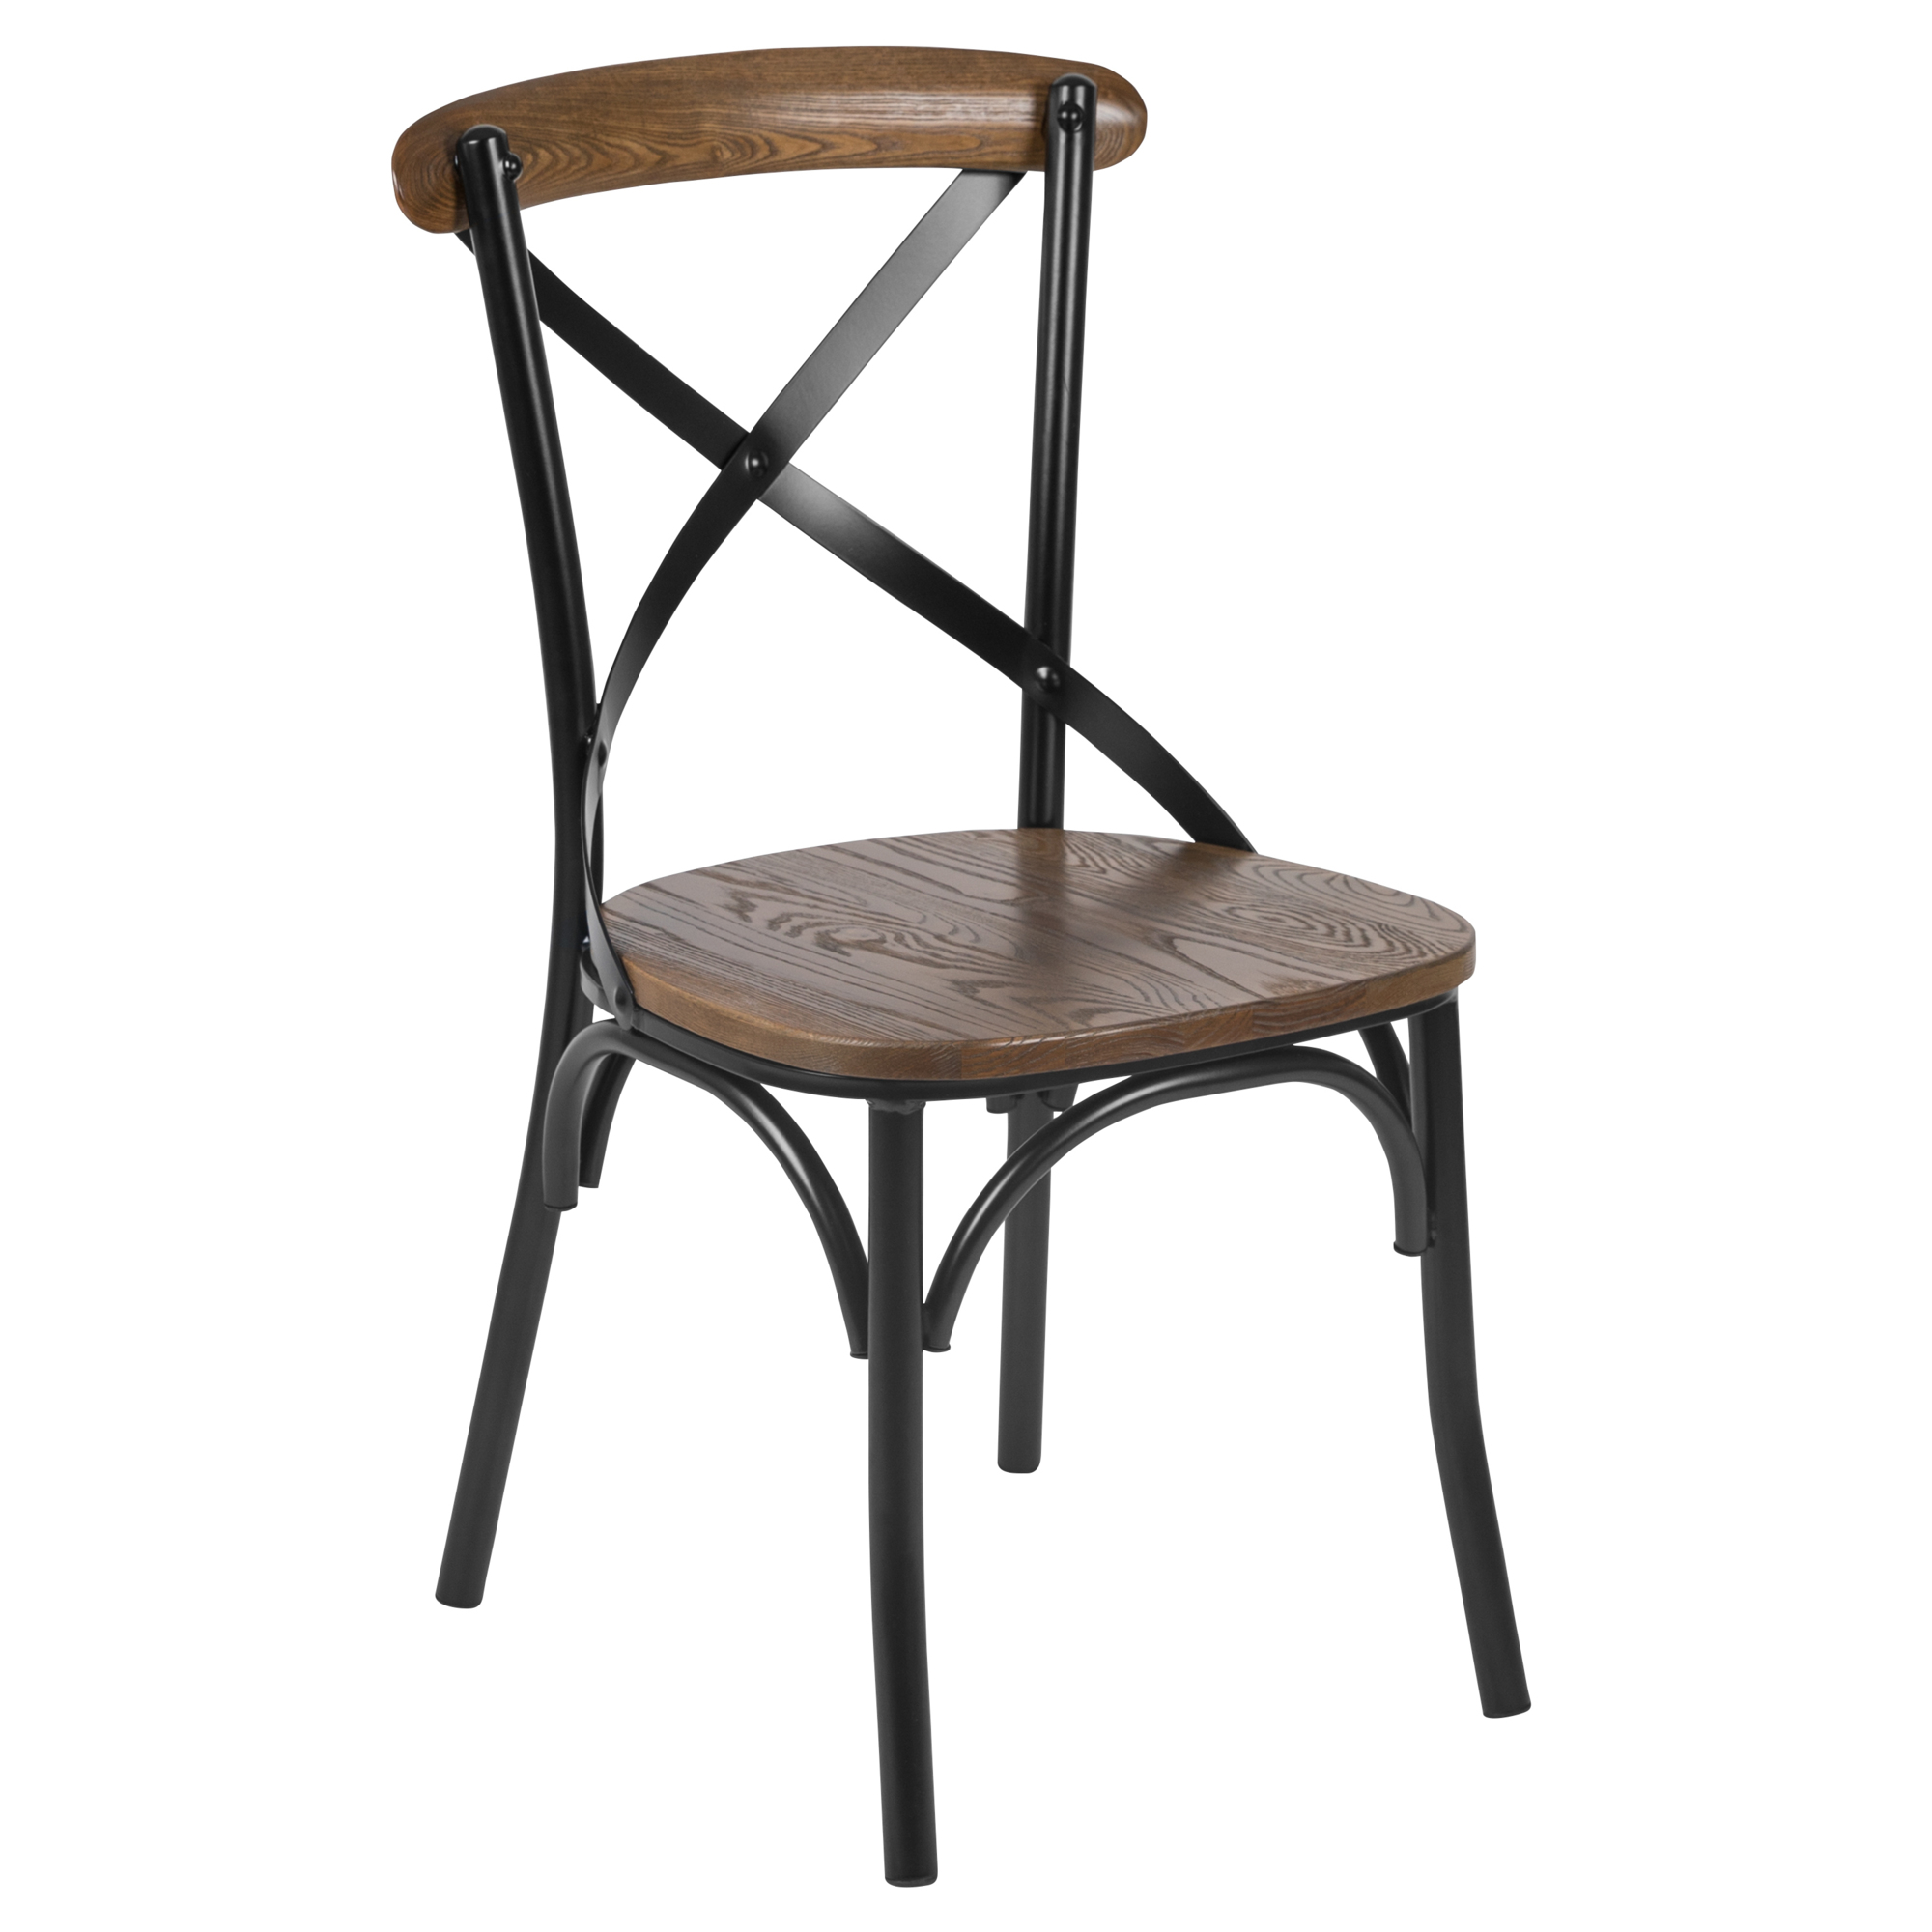 Flash Furniture, Black X-Back Dining Chair - Cross Back Chair, Primary Color Black, Included (qty.) 1, Model XBACKMETALFW